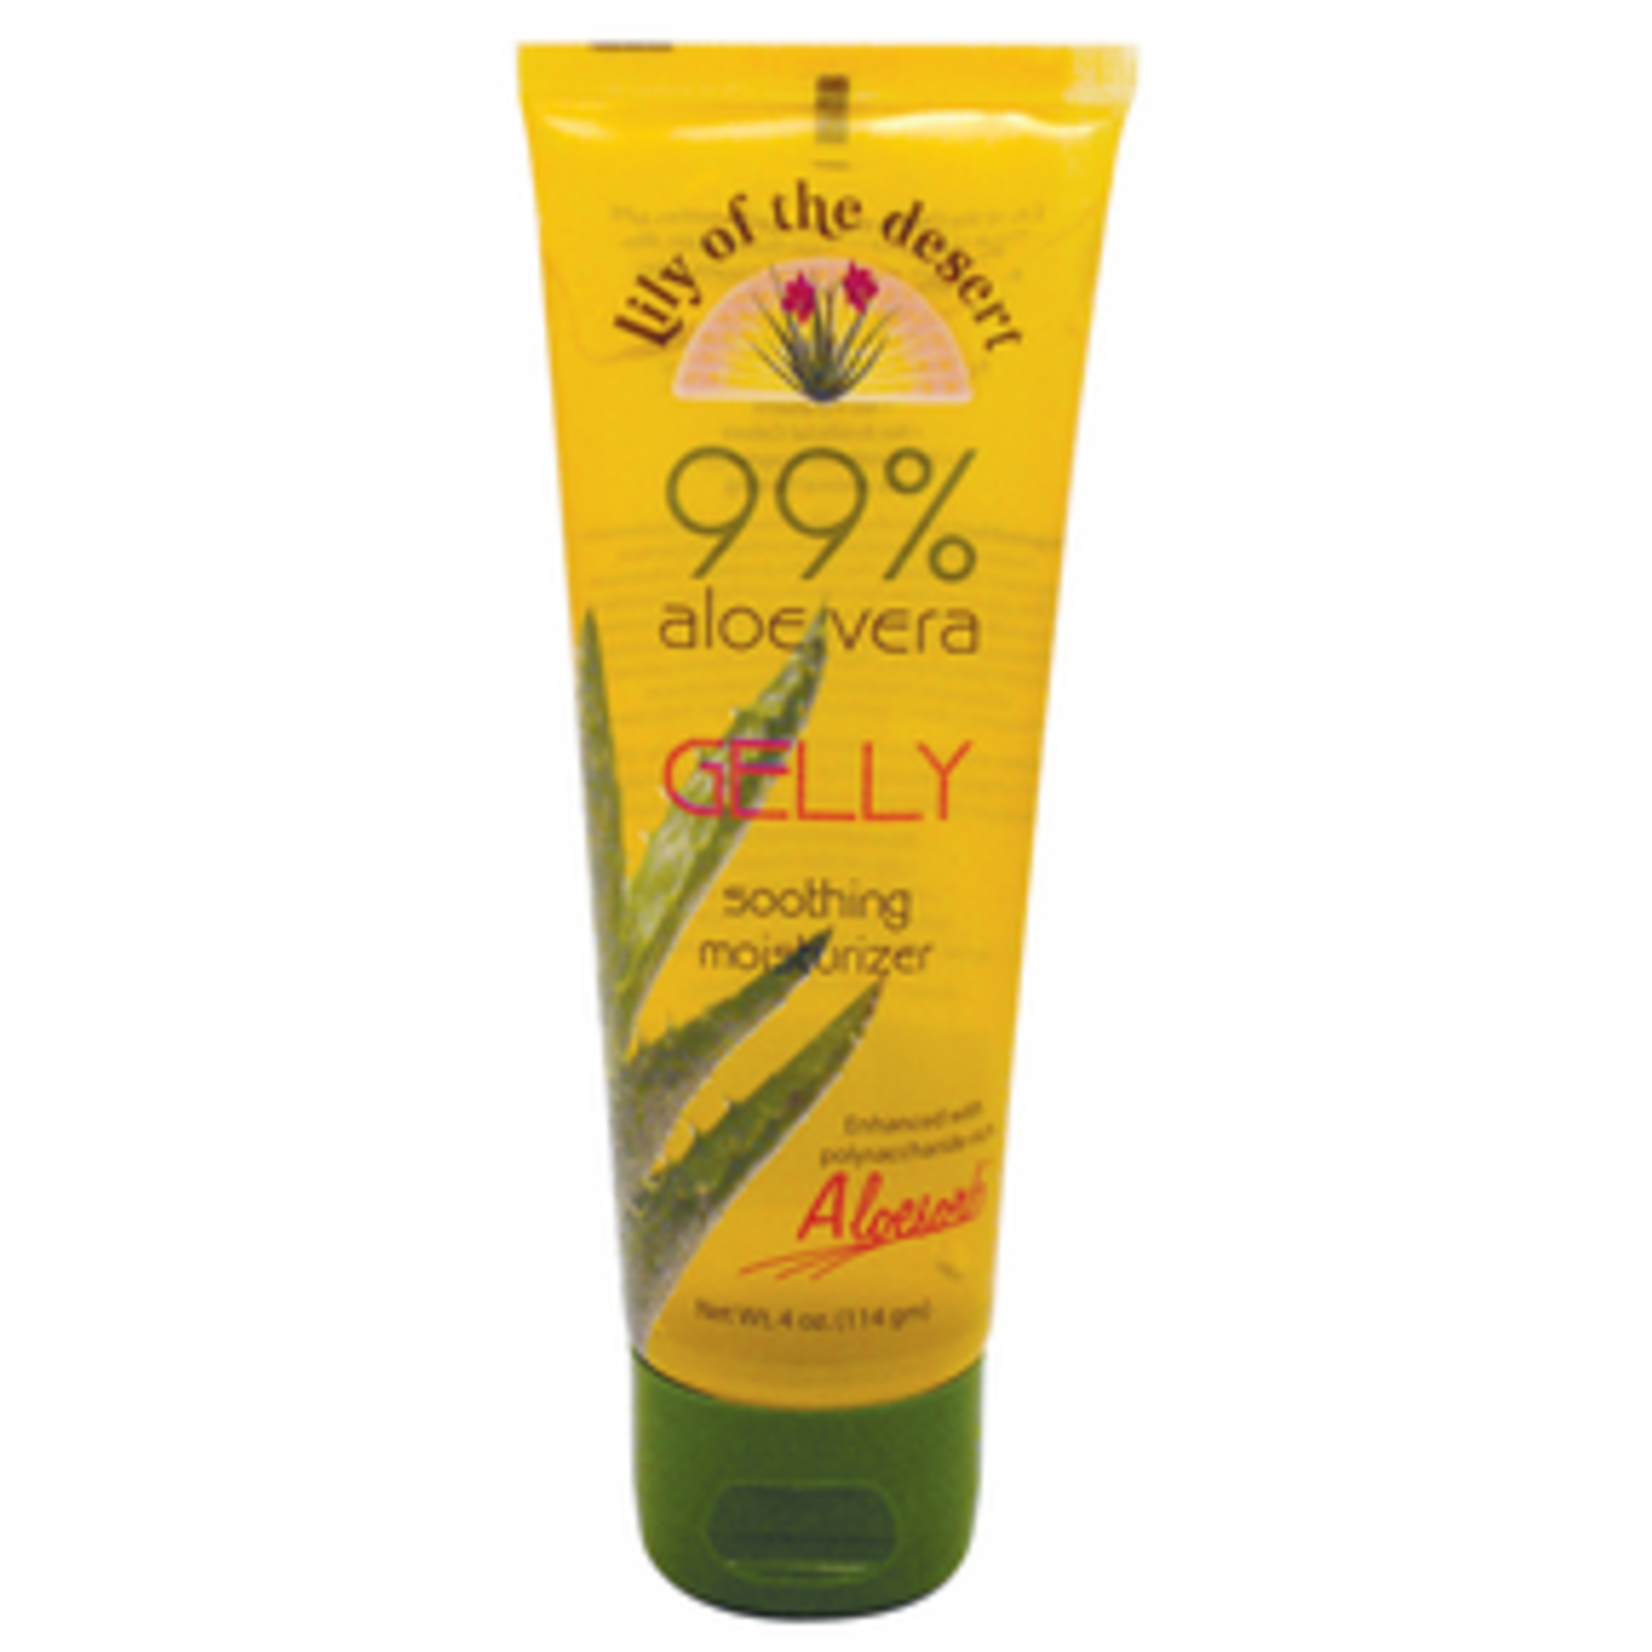 LILY OF THE DESERT LILY ALOE VERA GELLY 99% 4 OZ